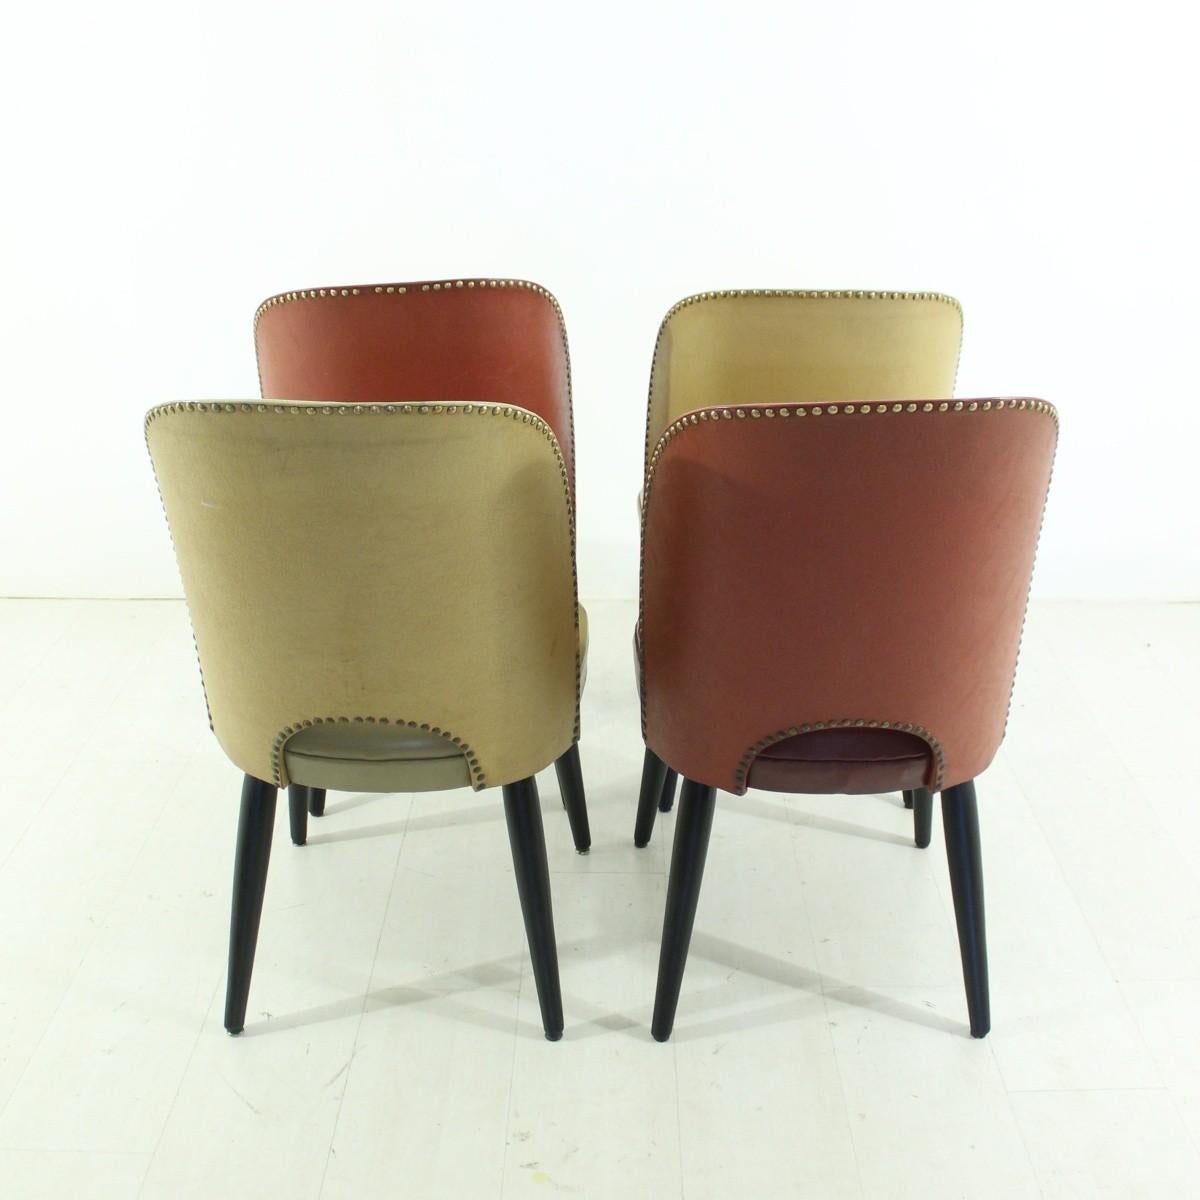 German Set of Four 1950s Rockabilly Chairs